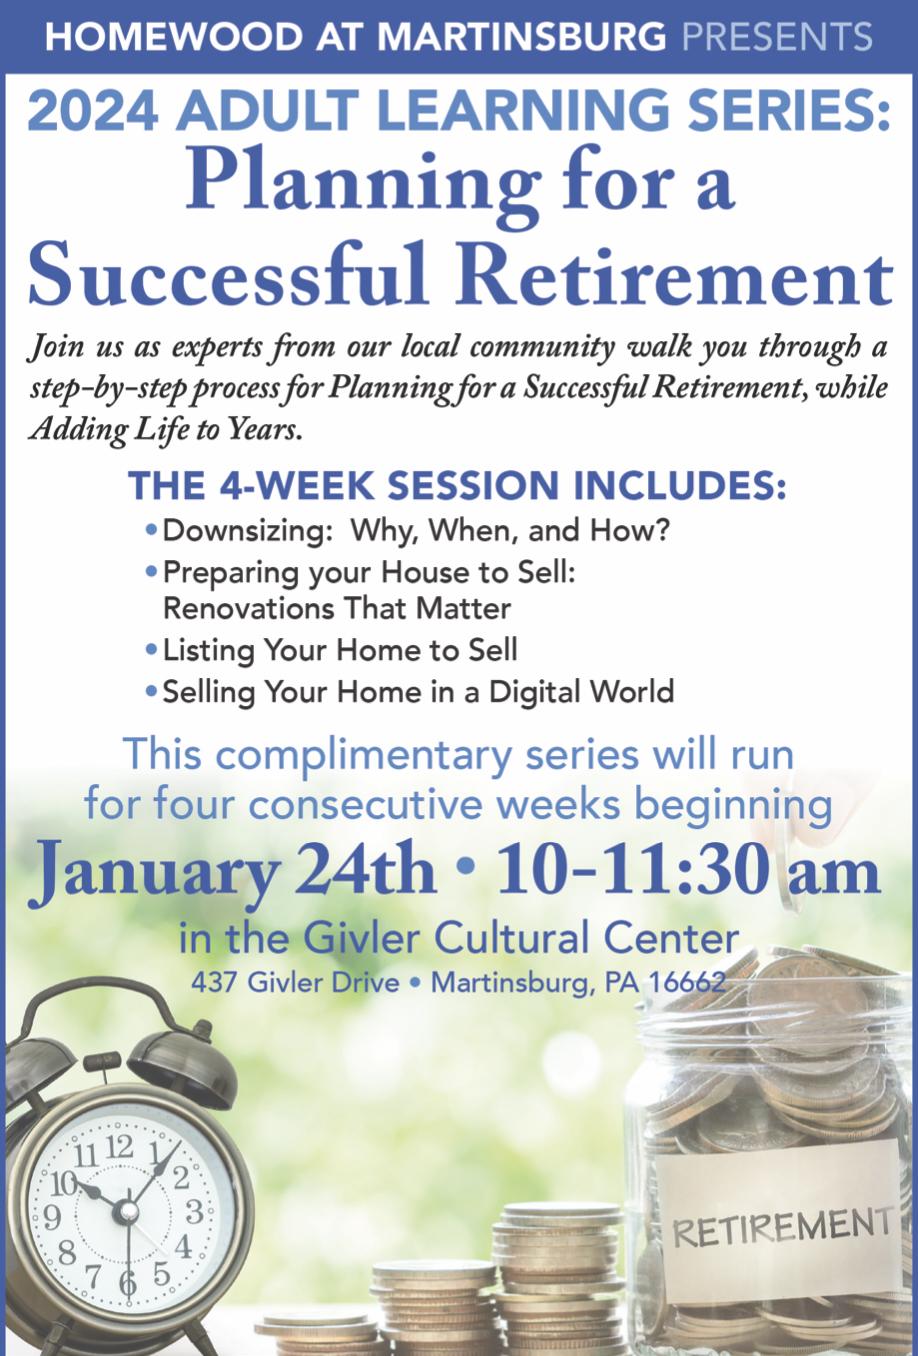 Planning for a Successful Retirement